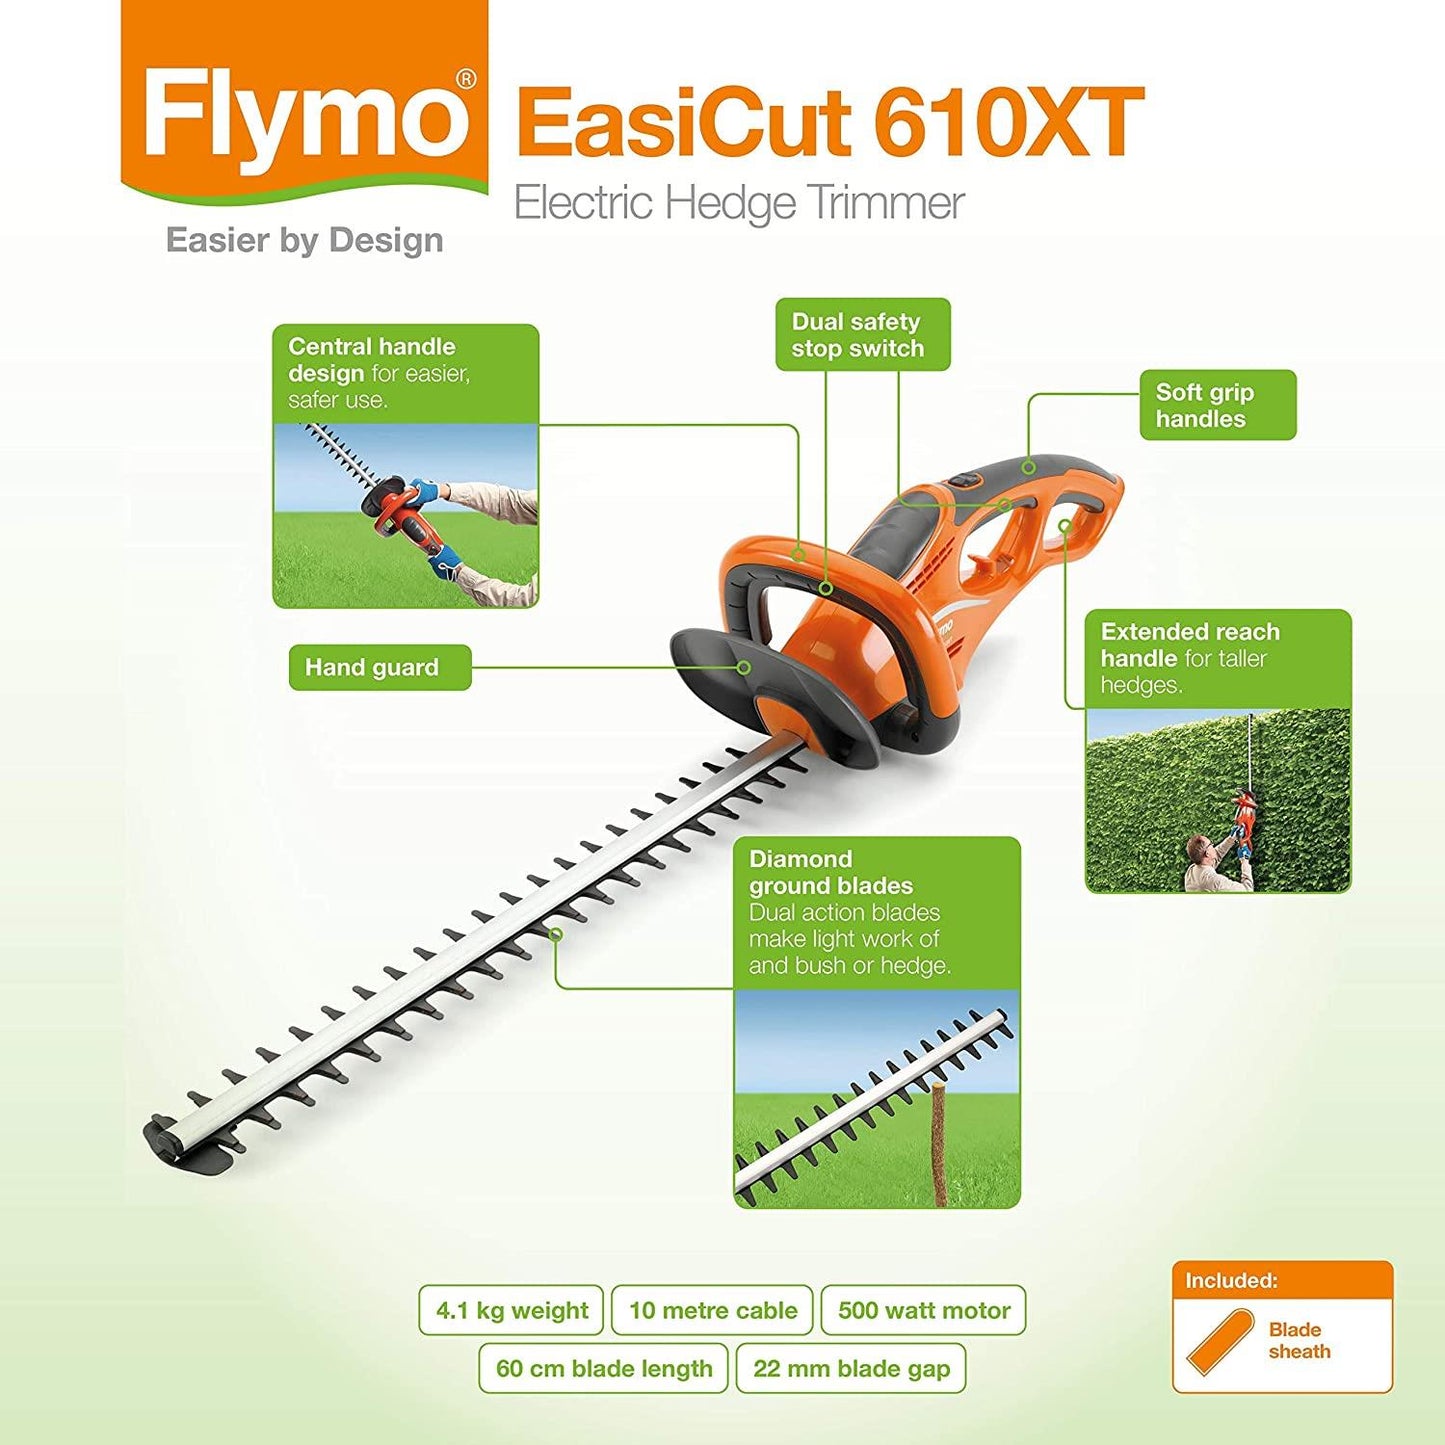 Flymo 500w EasiCut Electric Hedge Trimmer